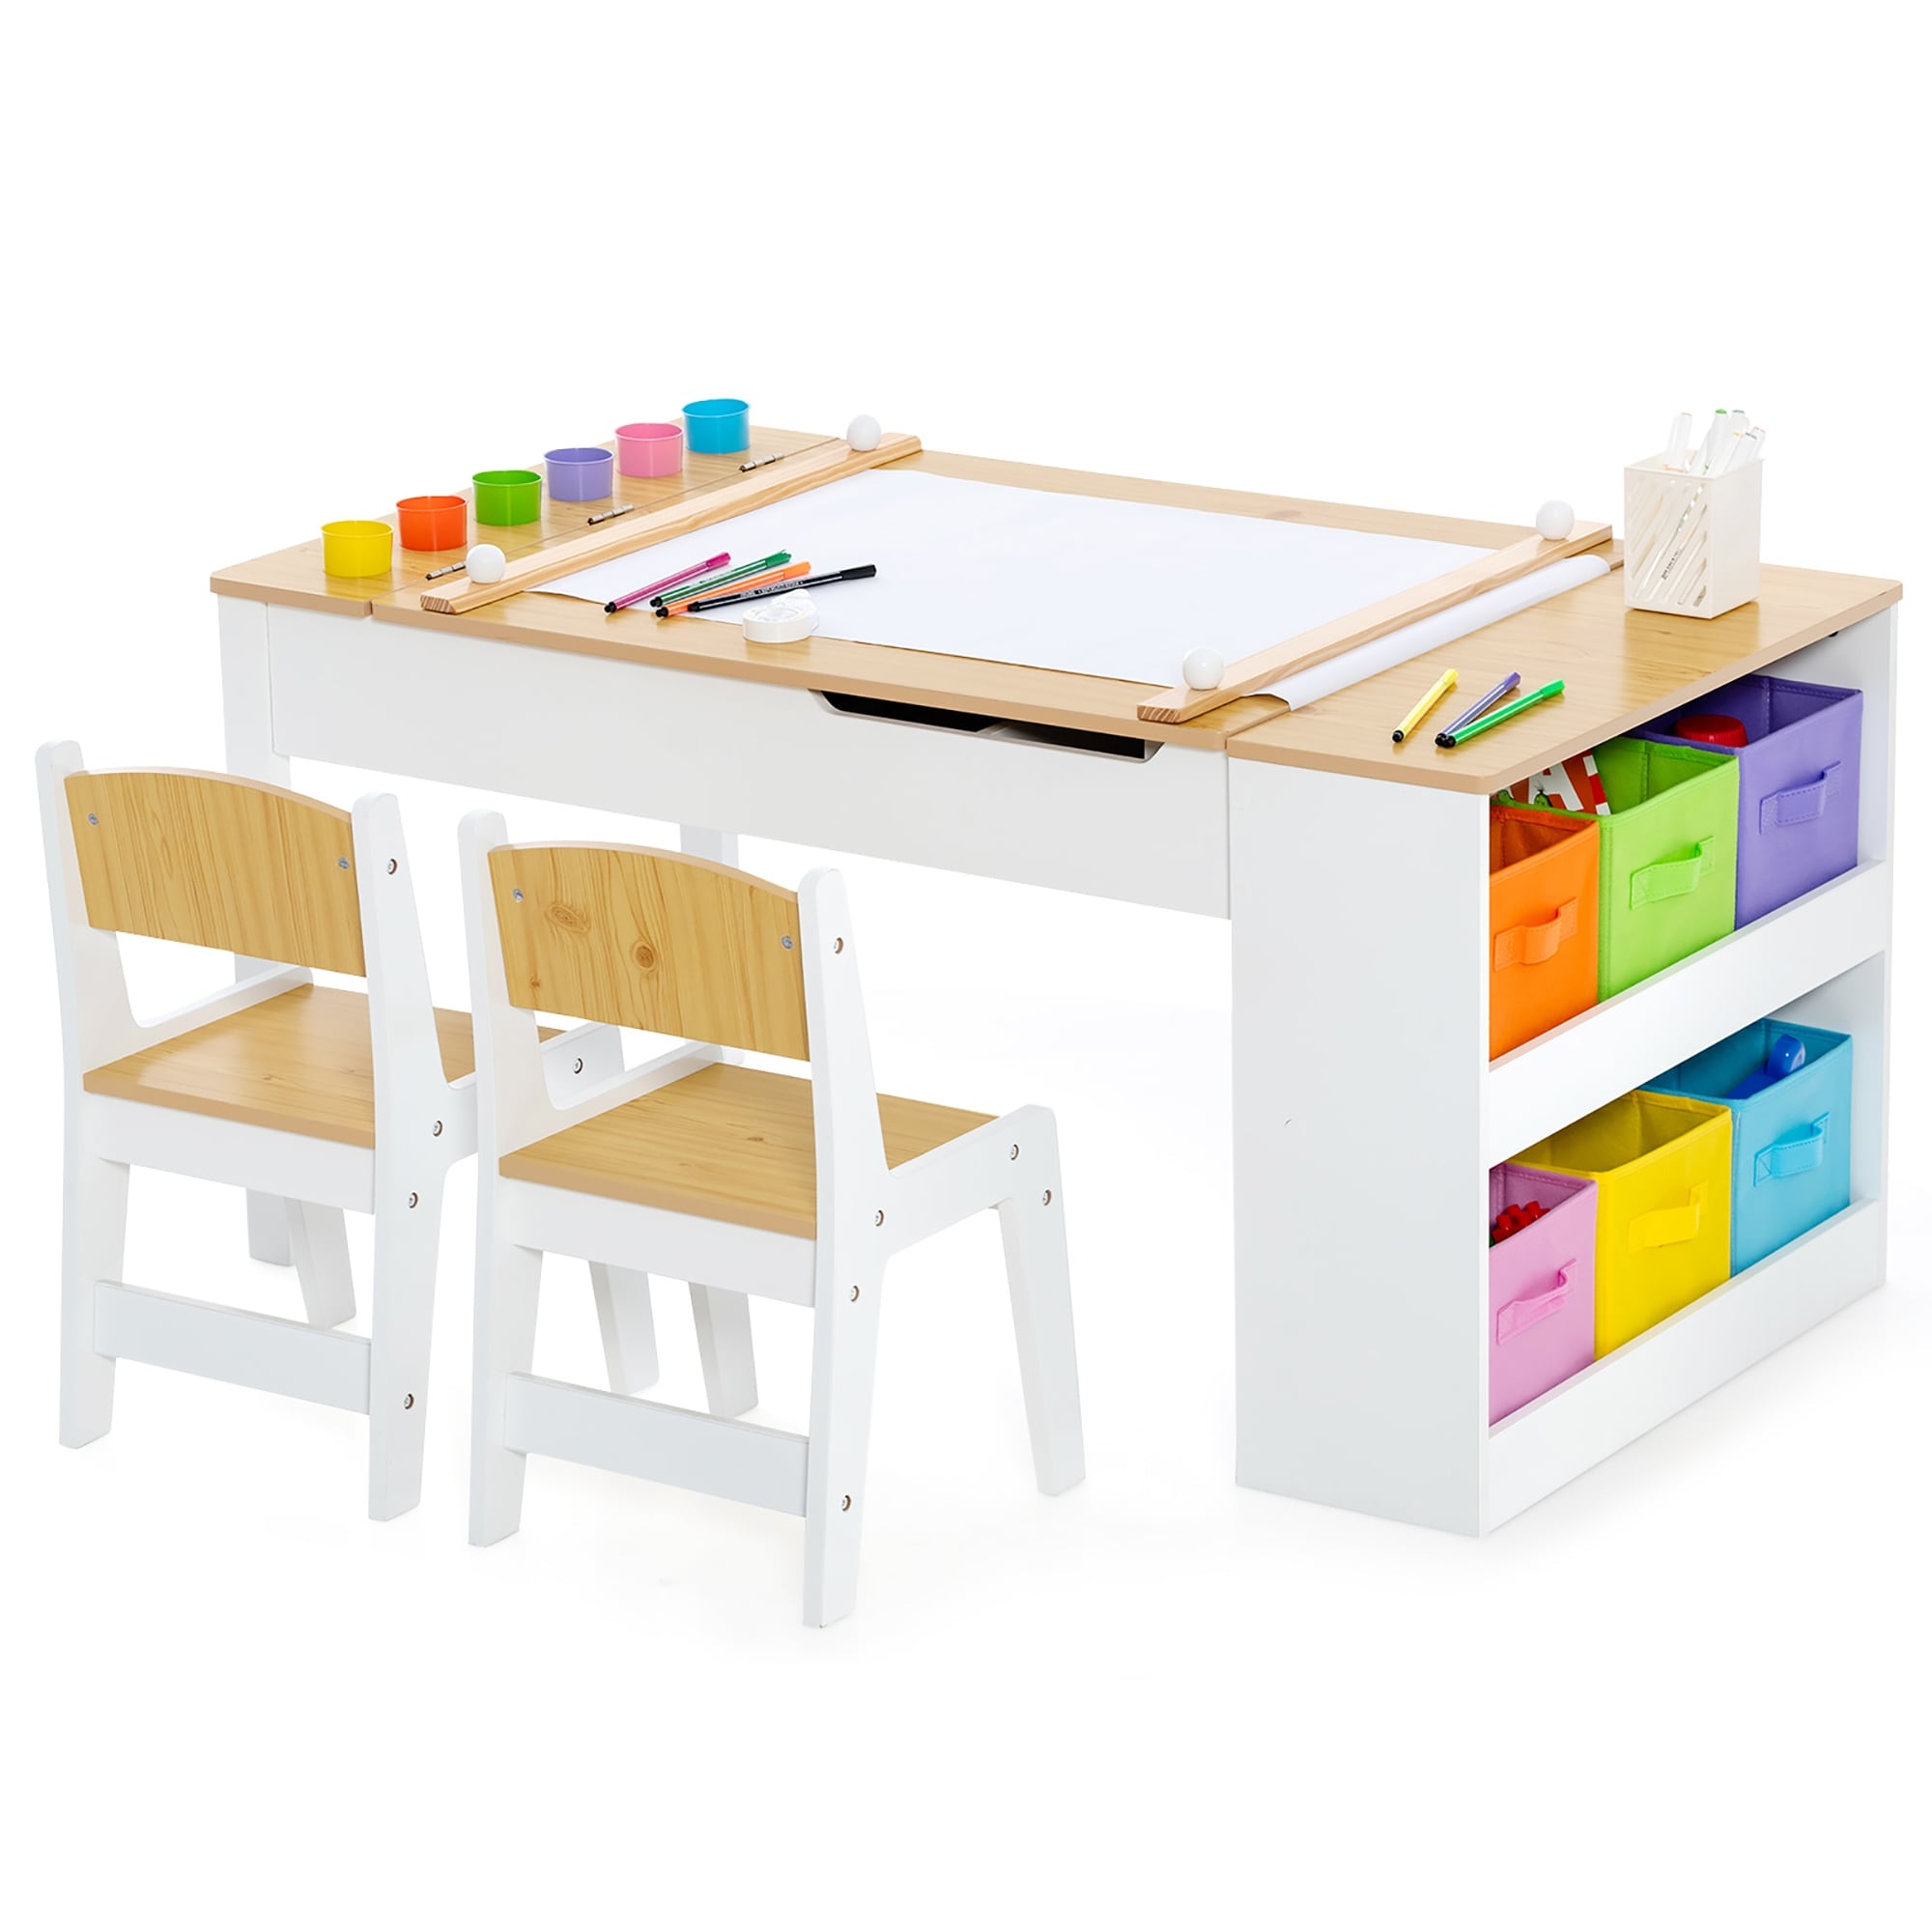 https://ak1.ostkcdn.com/images/products/is/images/direct/022b5c93acd19772b77ea0b4111445ed6556b56b/Gymax-2-in-1-Kids-Wooden-Art-Table-and-Art-Easel-Set-w--Chairs-Paper.jpg